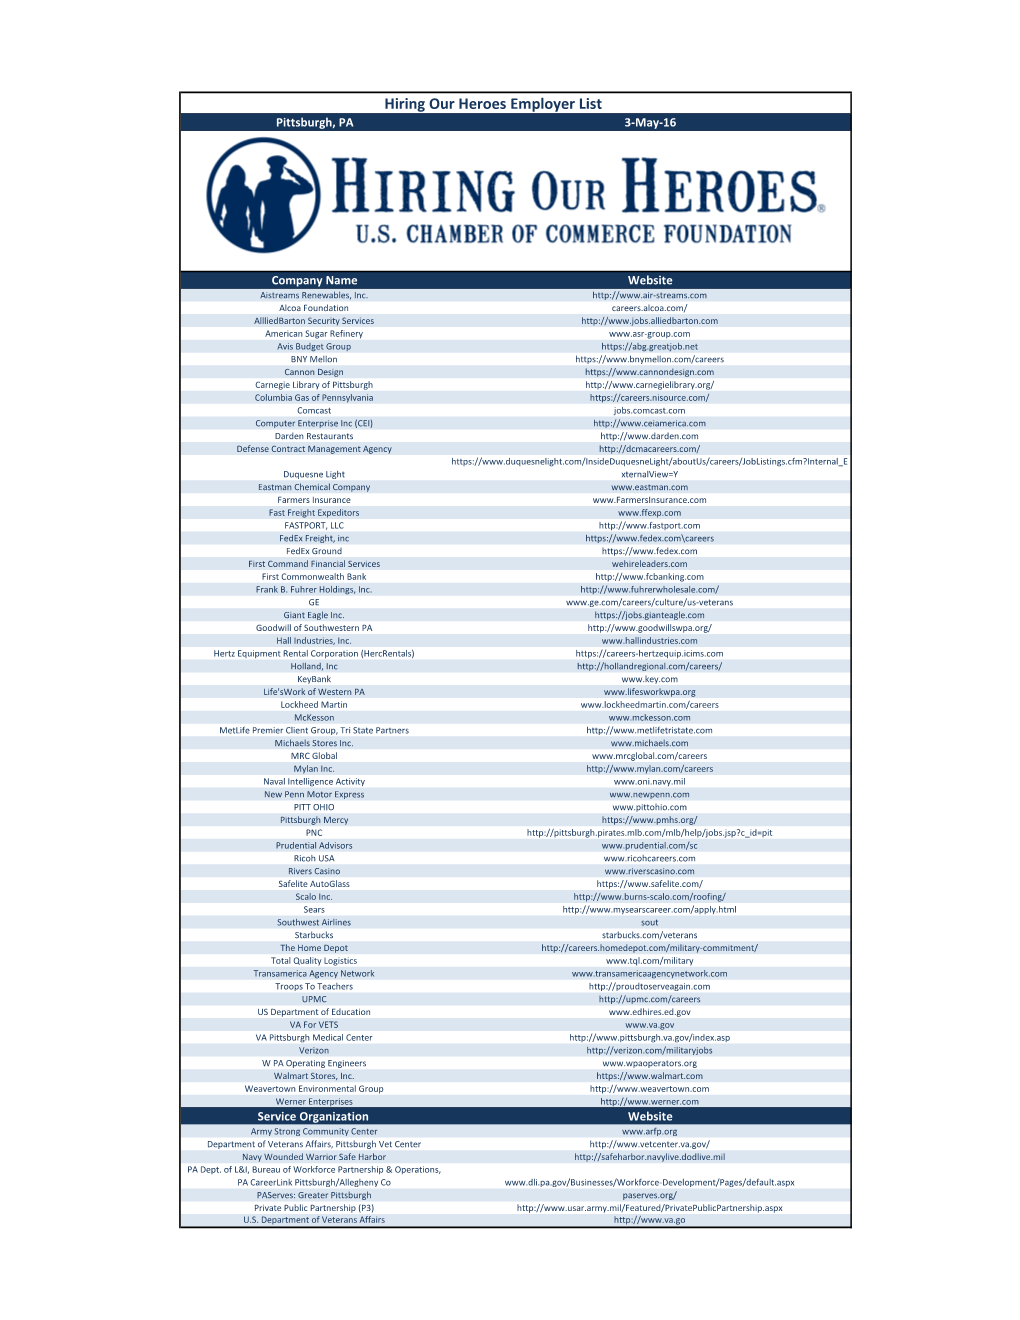 Hiring Our Heroes Employer List Pittsburgh, PA 3-May-16